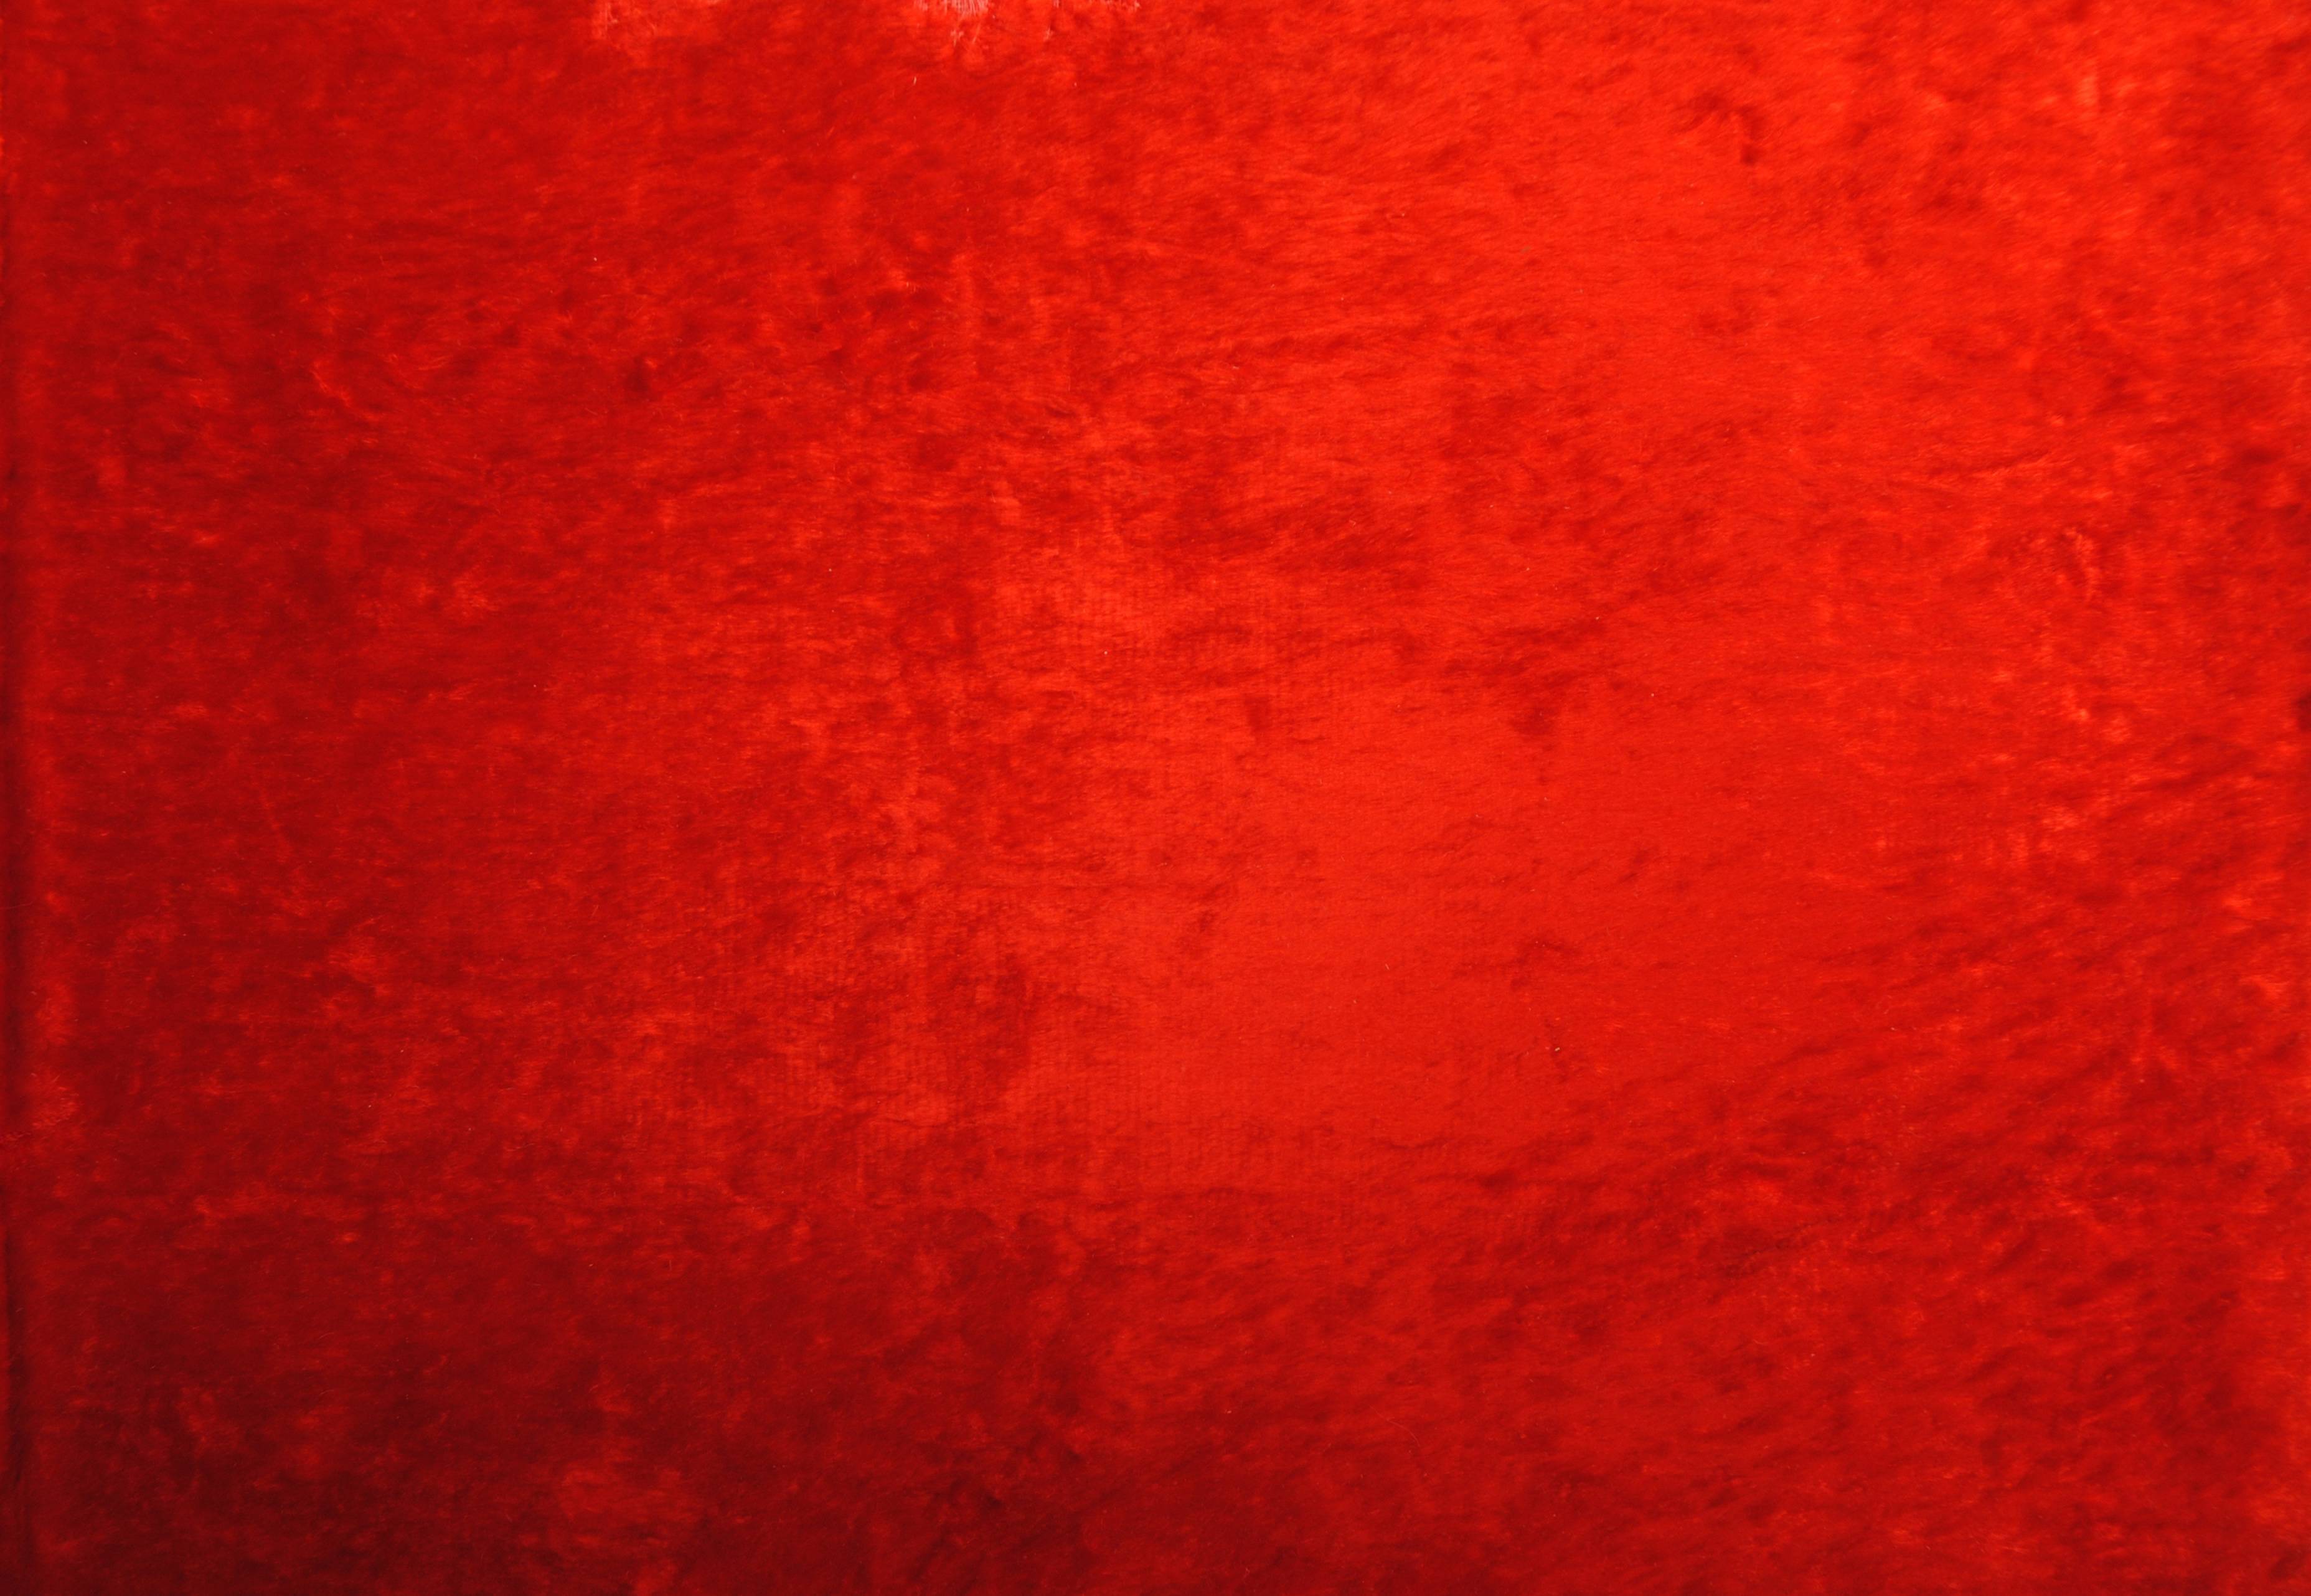 Red Wallpaper High Quality Download Free. Wallpaper 4k